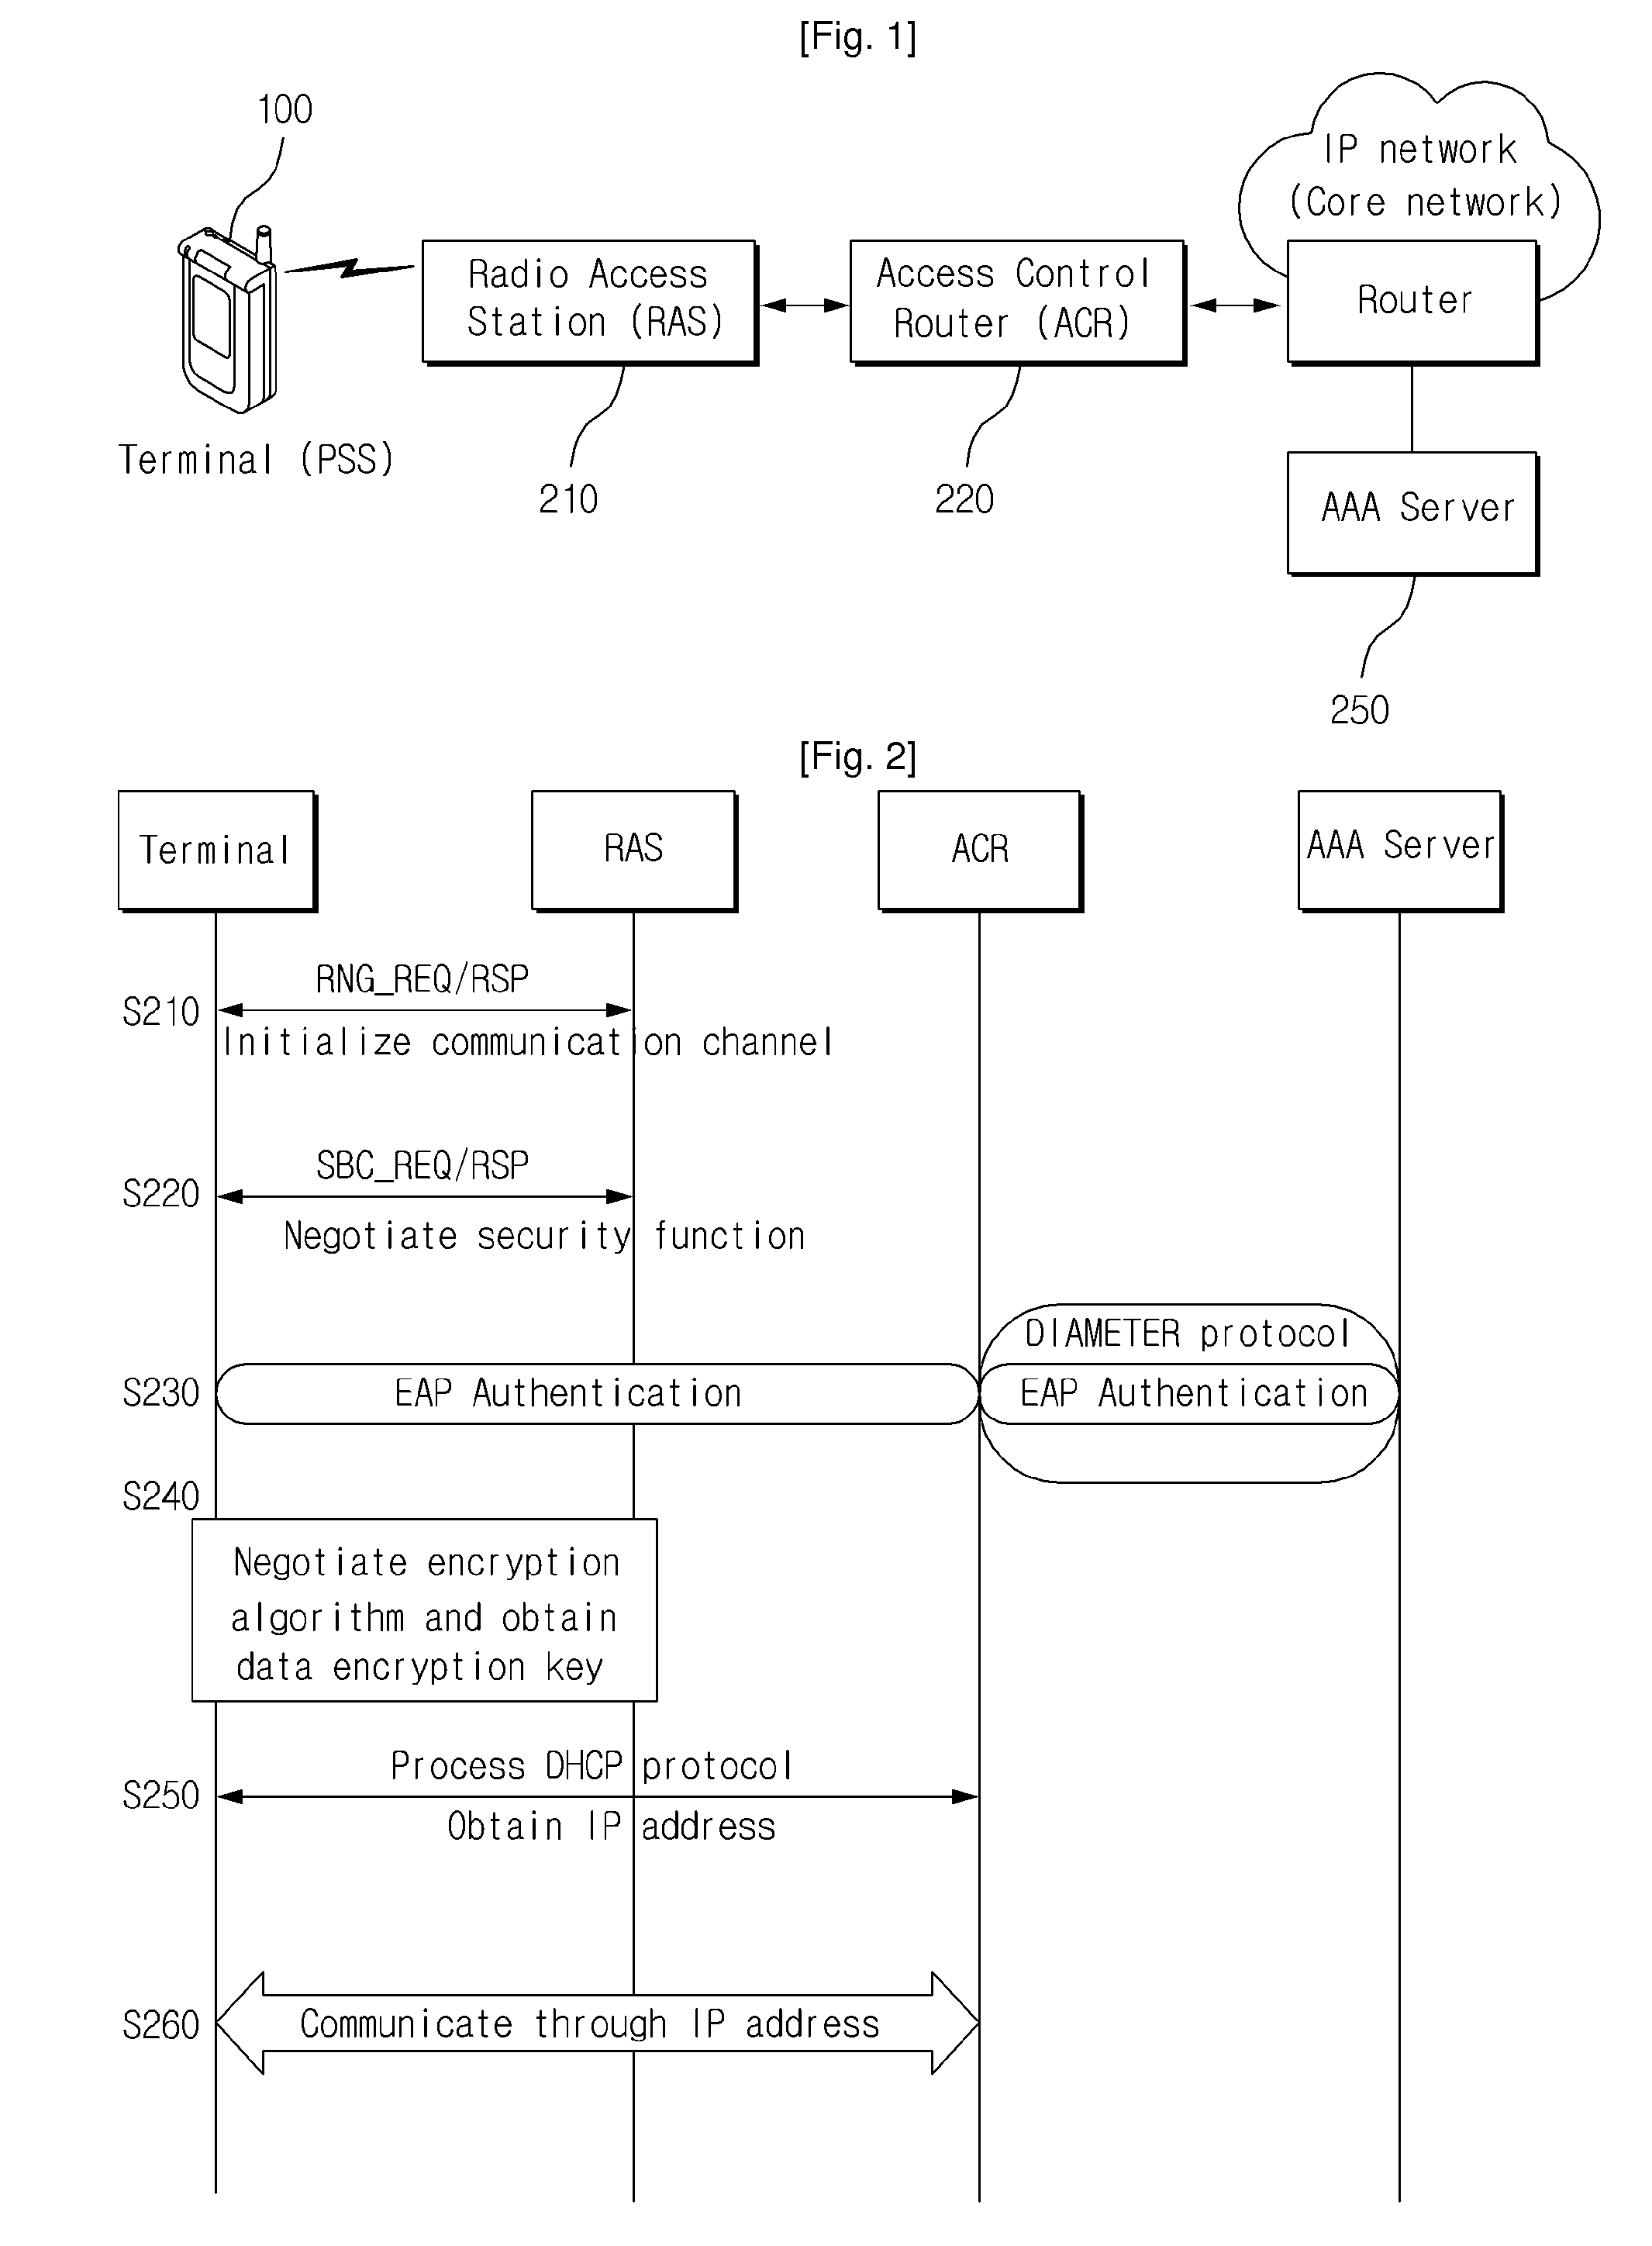 Apparatus and Method for Processing Eap-Aka Authentication in the Non-Usim Terminal